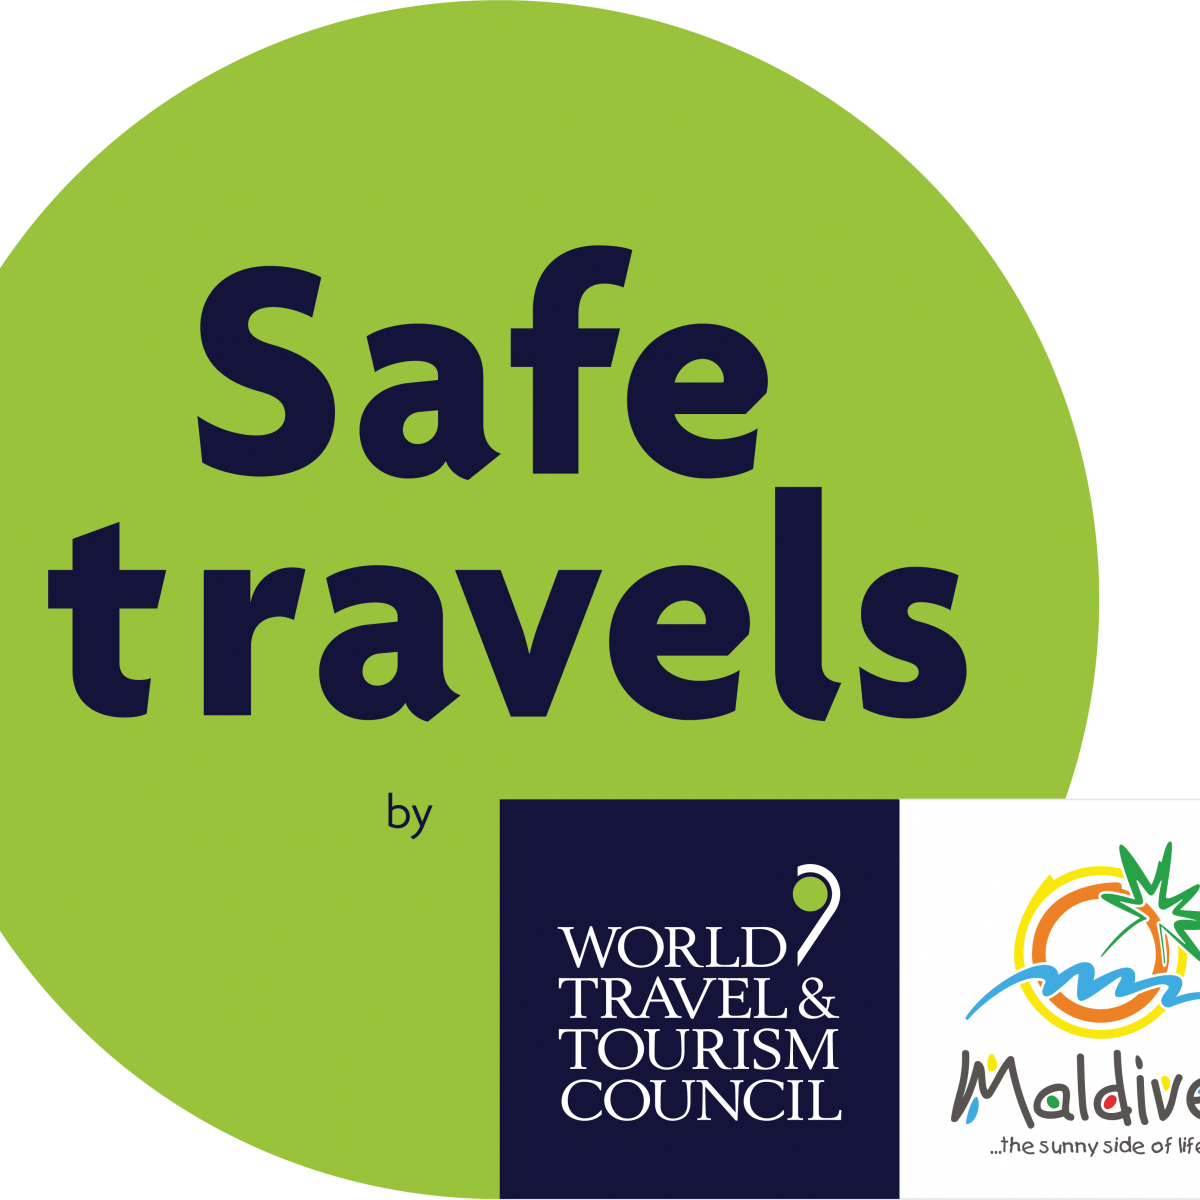 Authorities assure Maldives is safe for travel